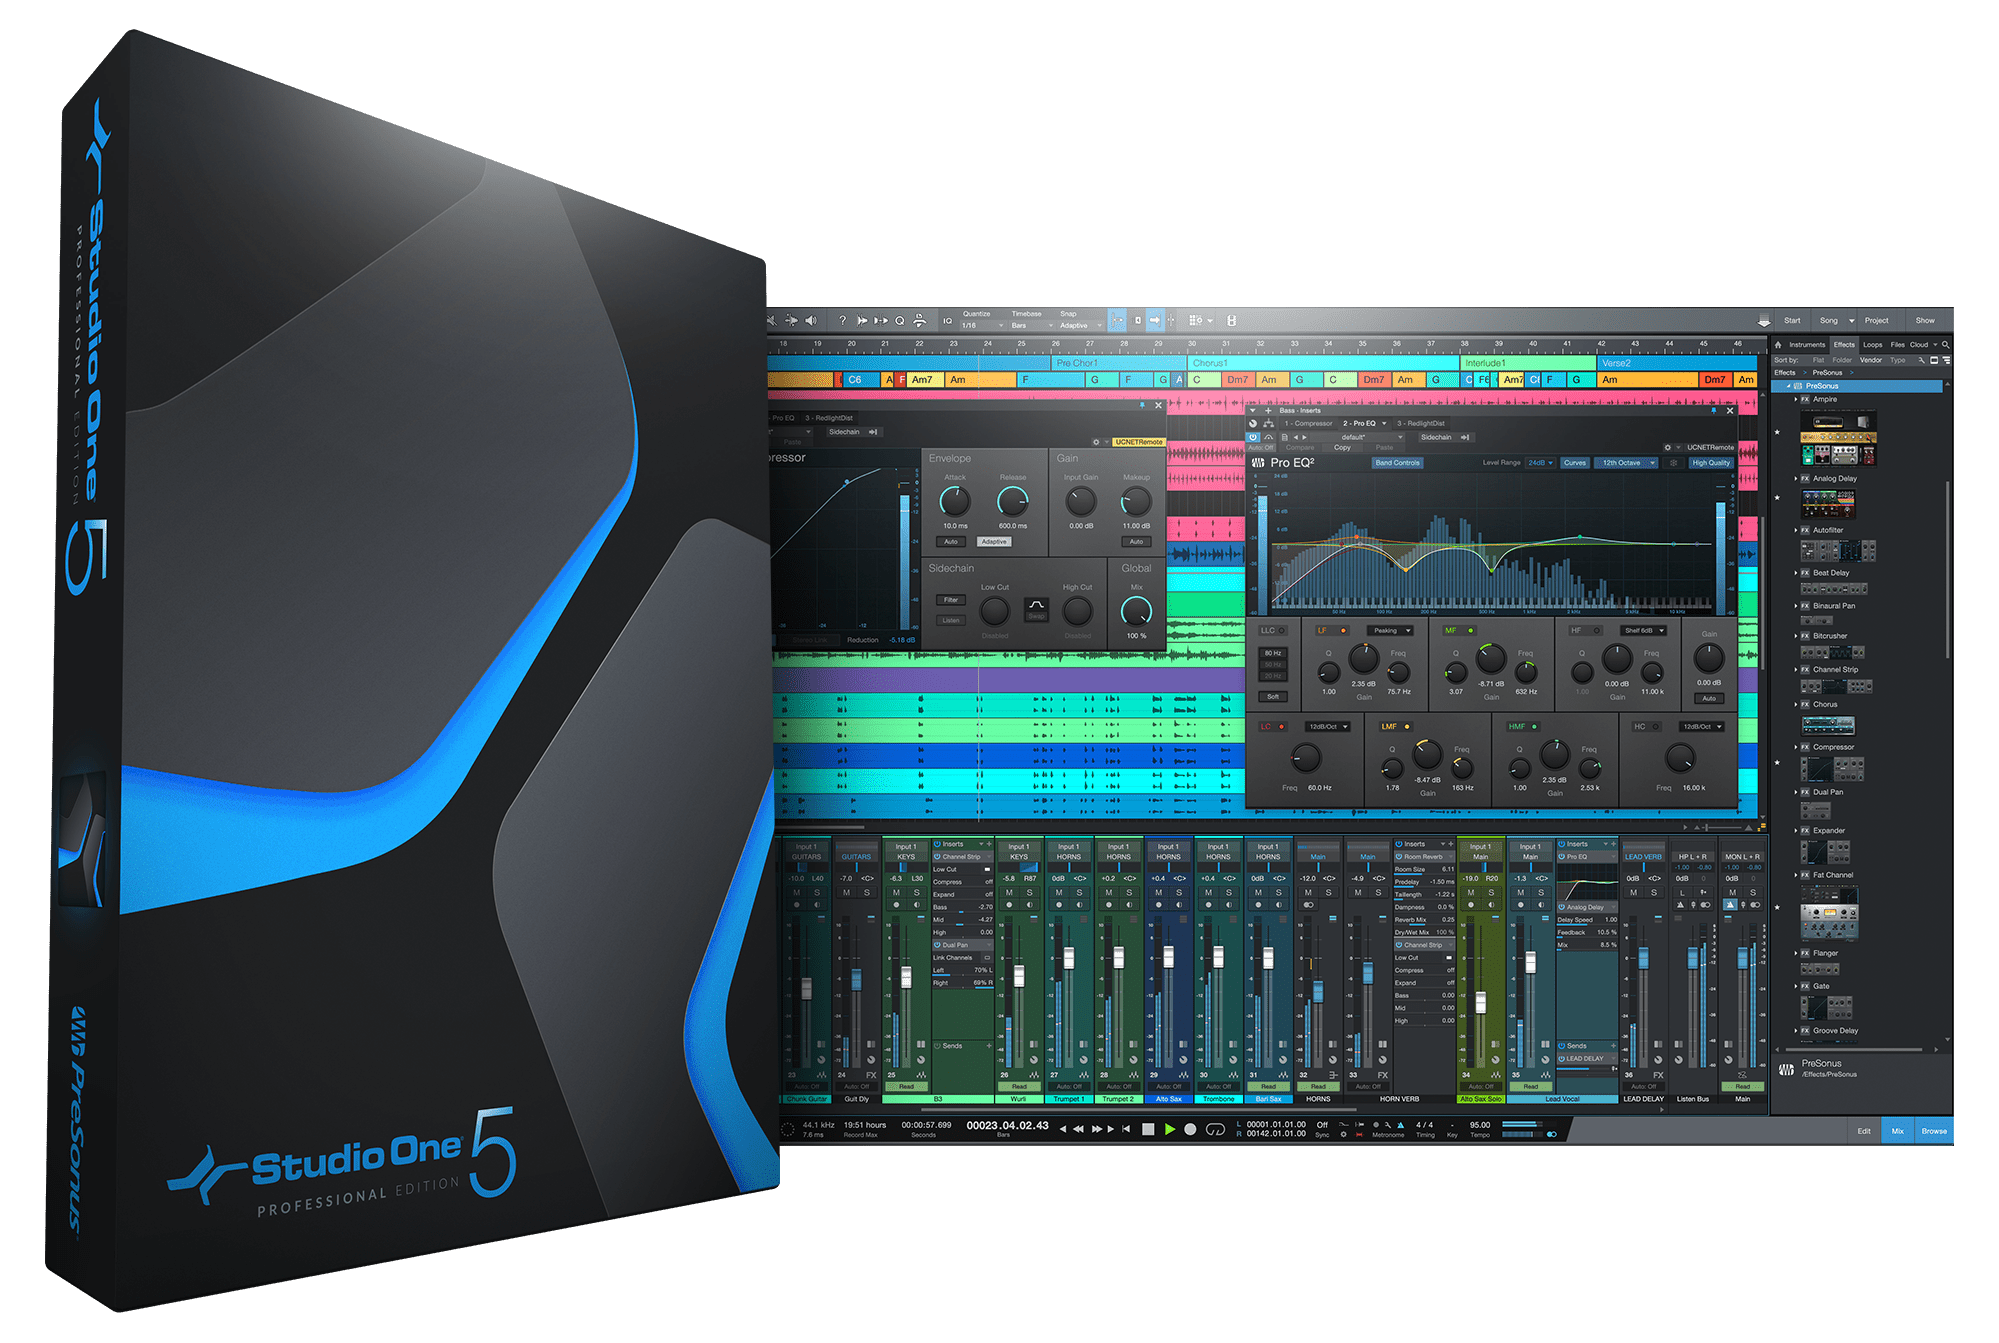 What’s New in Studio One 5.1